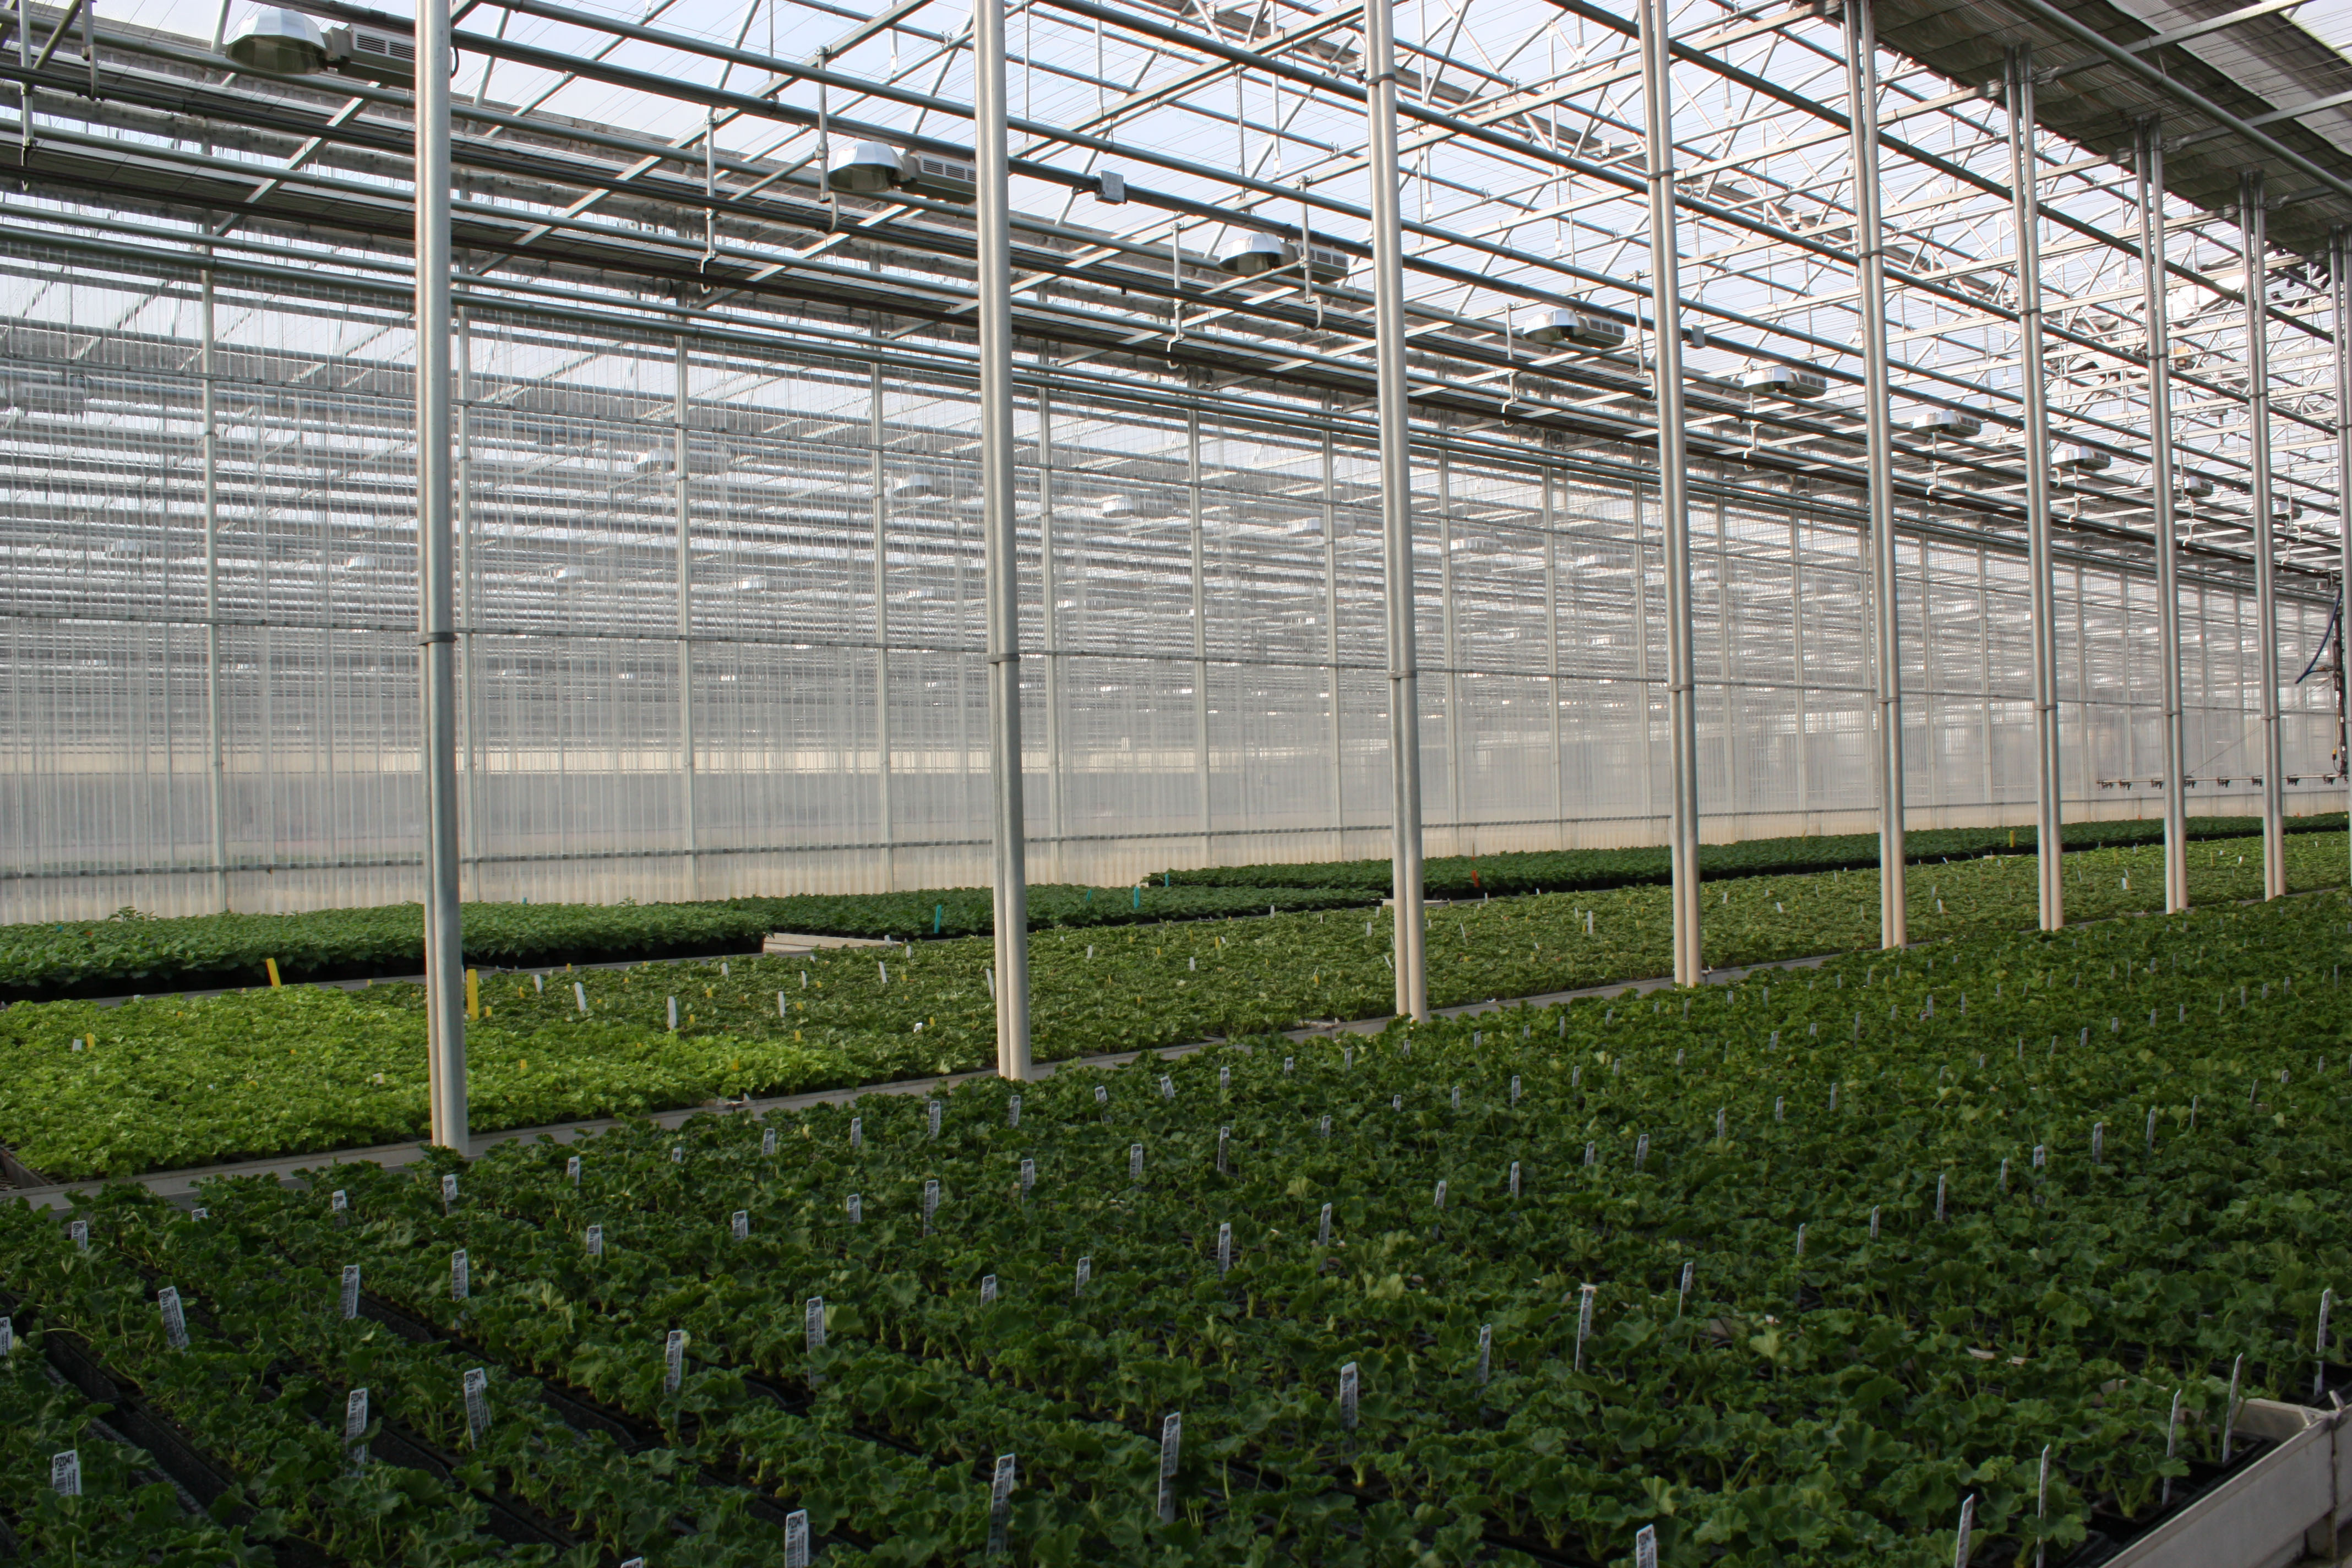 alberta-ndp-gives-greenhouse-growers-carbon-tax-rebate-greenhouse